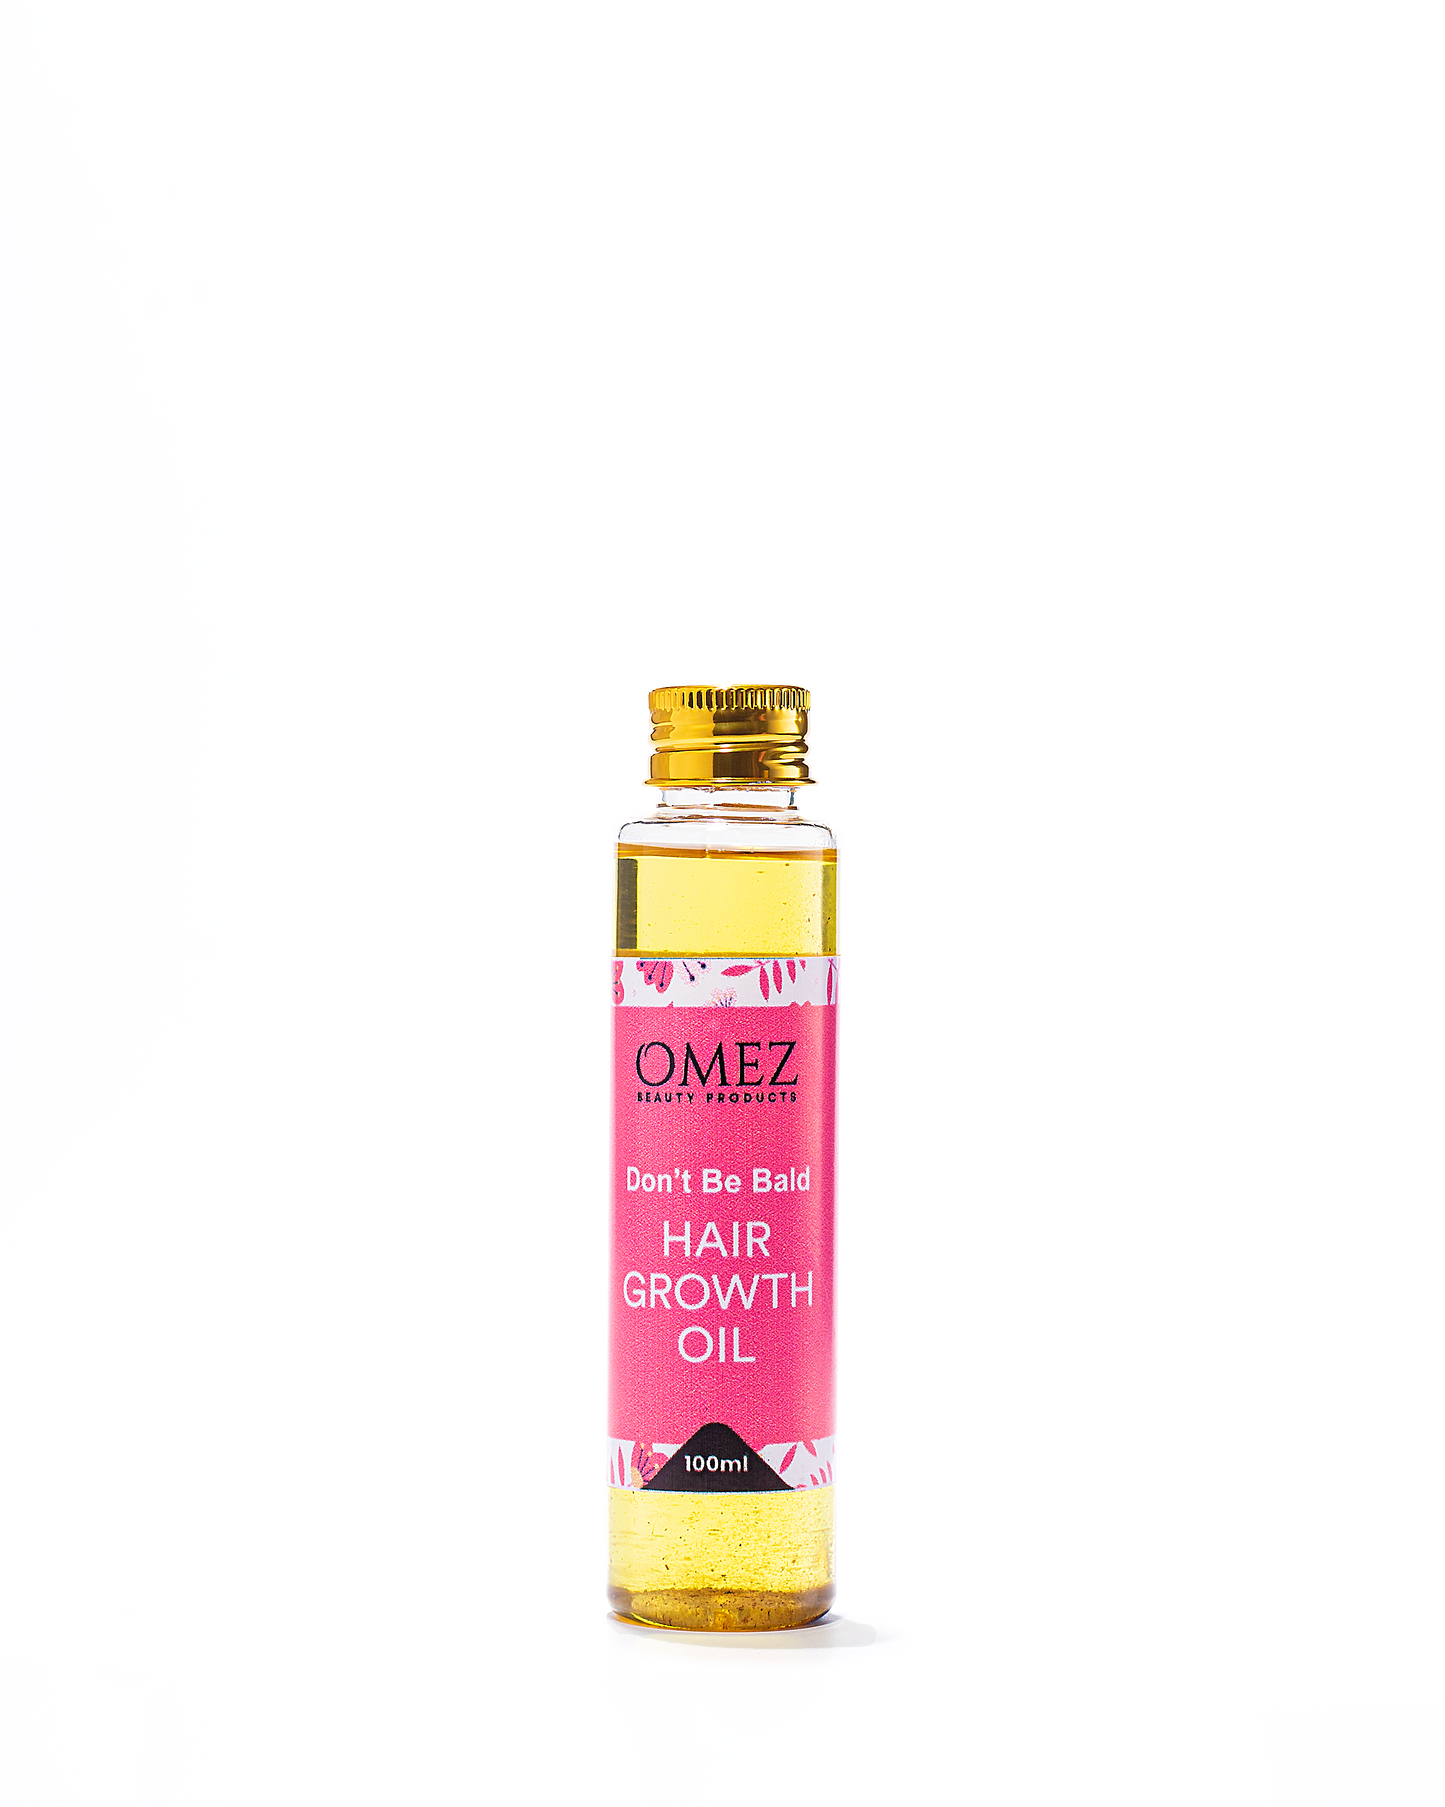 Don’t be bald - - Omez Beauty Products 